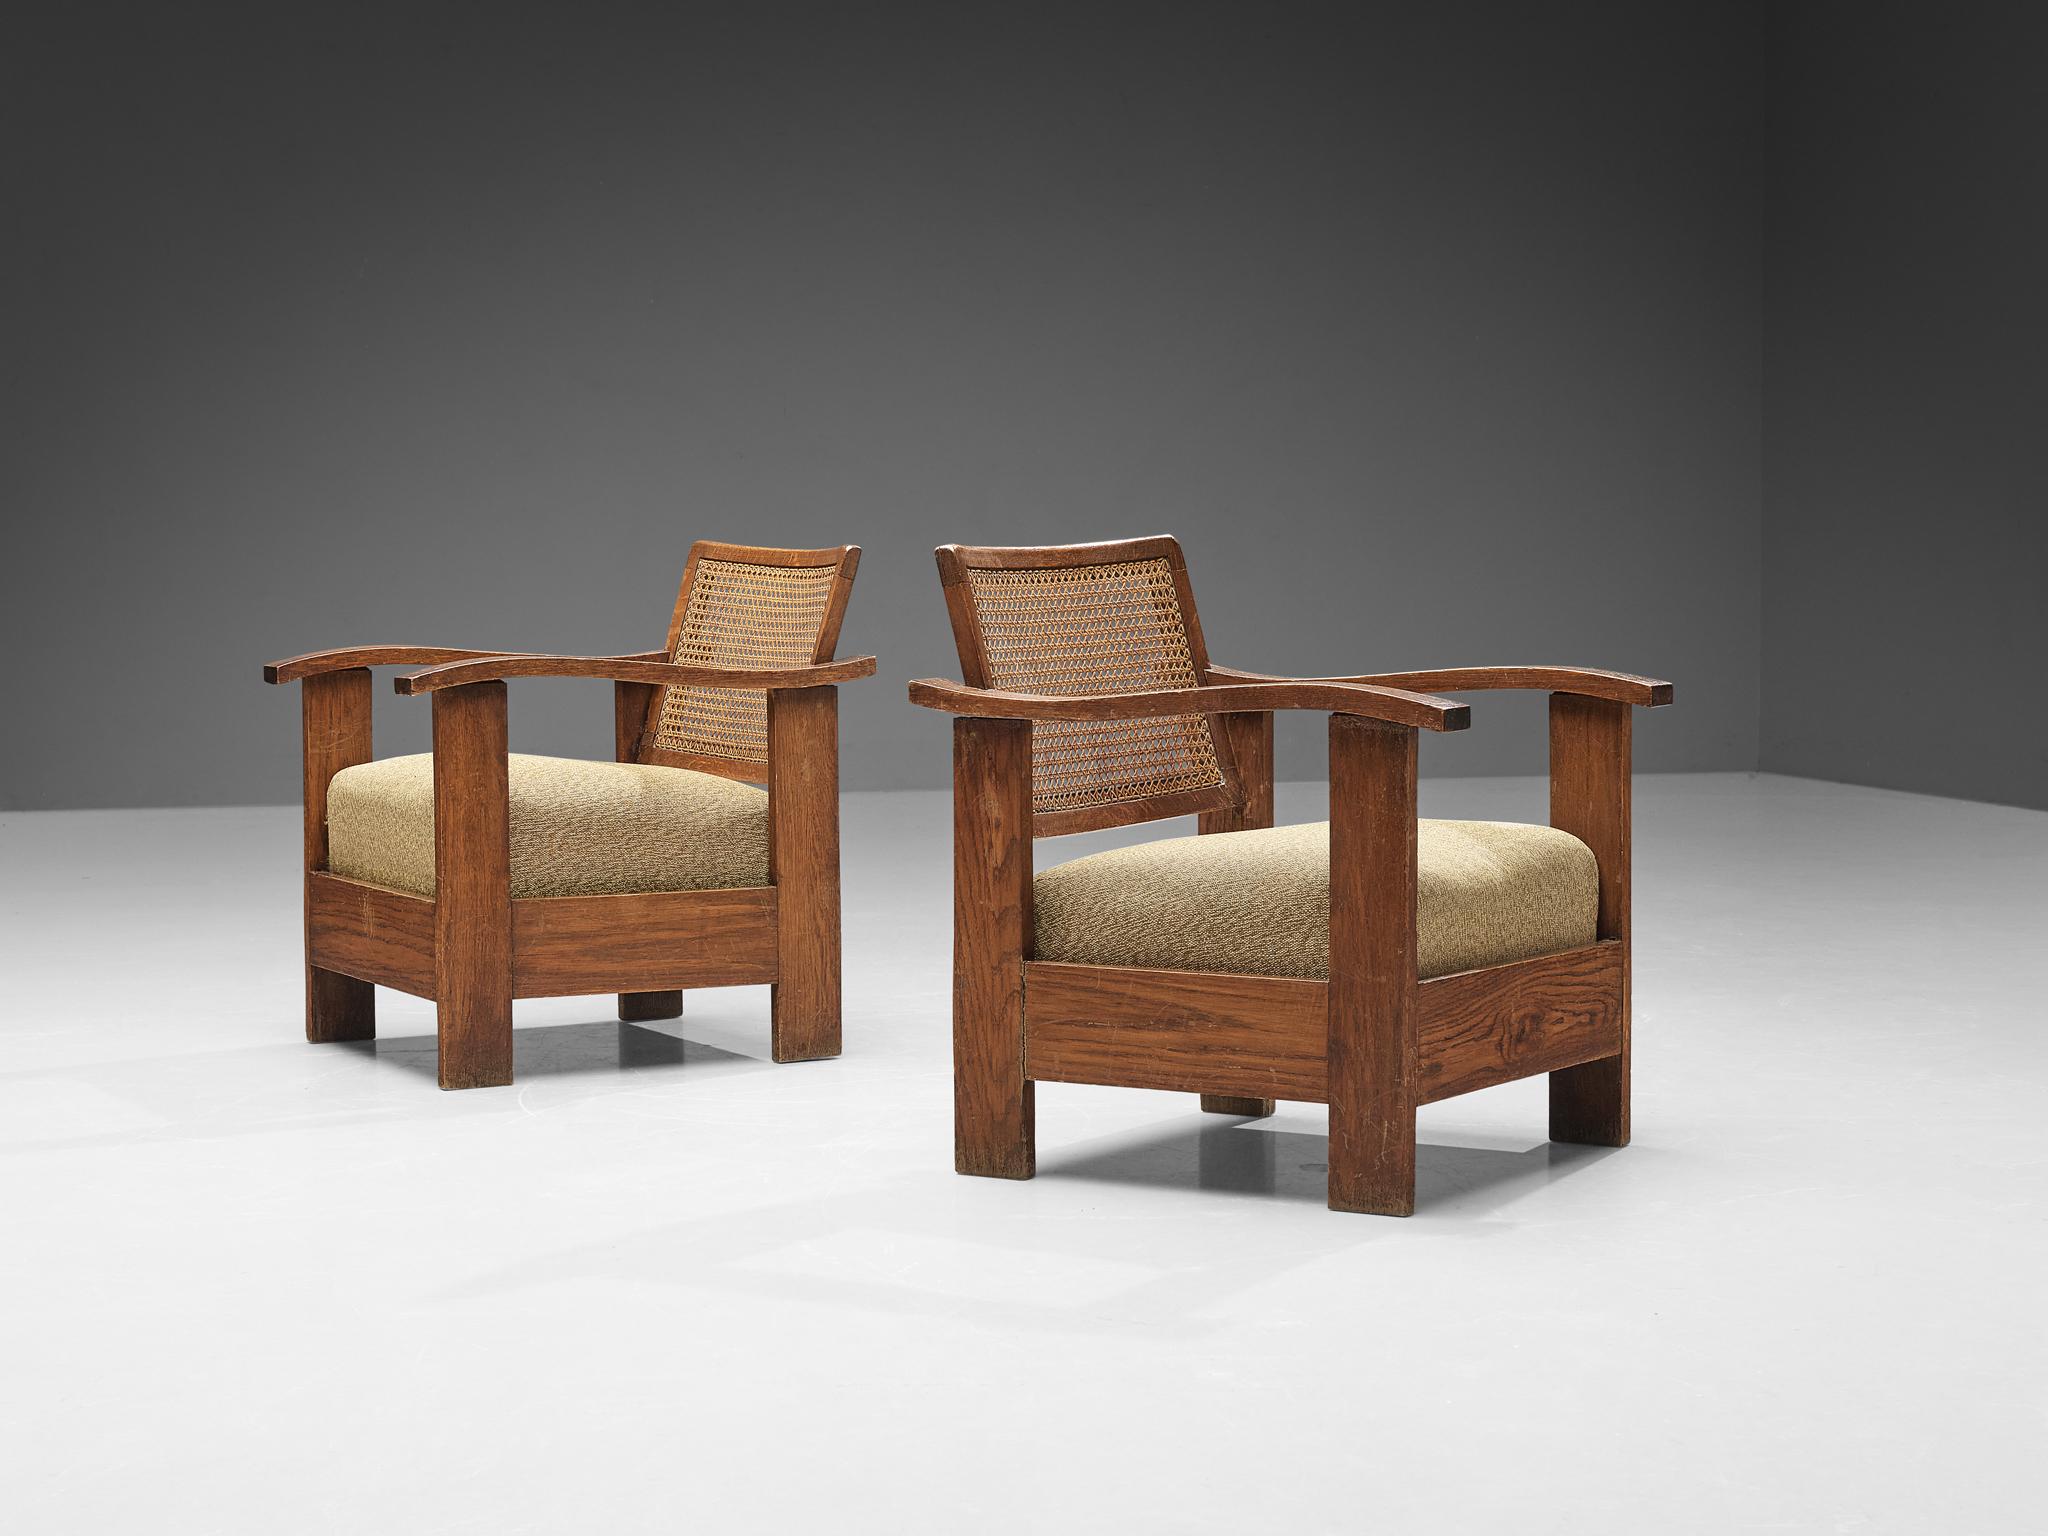 Easy chairs, oak, wicker, fabric, Spain, 1930s. 

Sturdy pair of Spanish easy chairs designed in the 1930s. The structure of these chairs is composed entirely out of oak, while the backrest is made of wicker and therefore creates an open design. Due